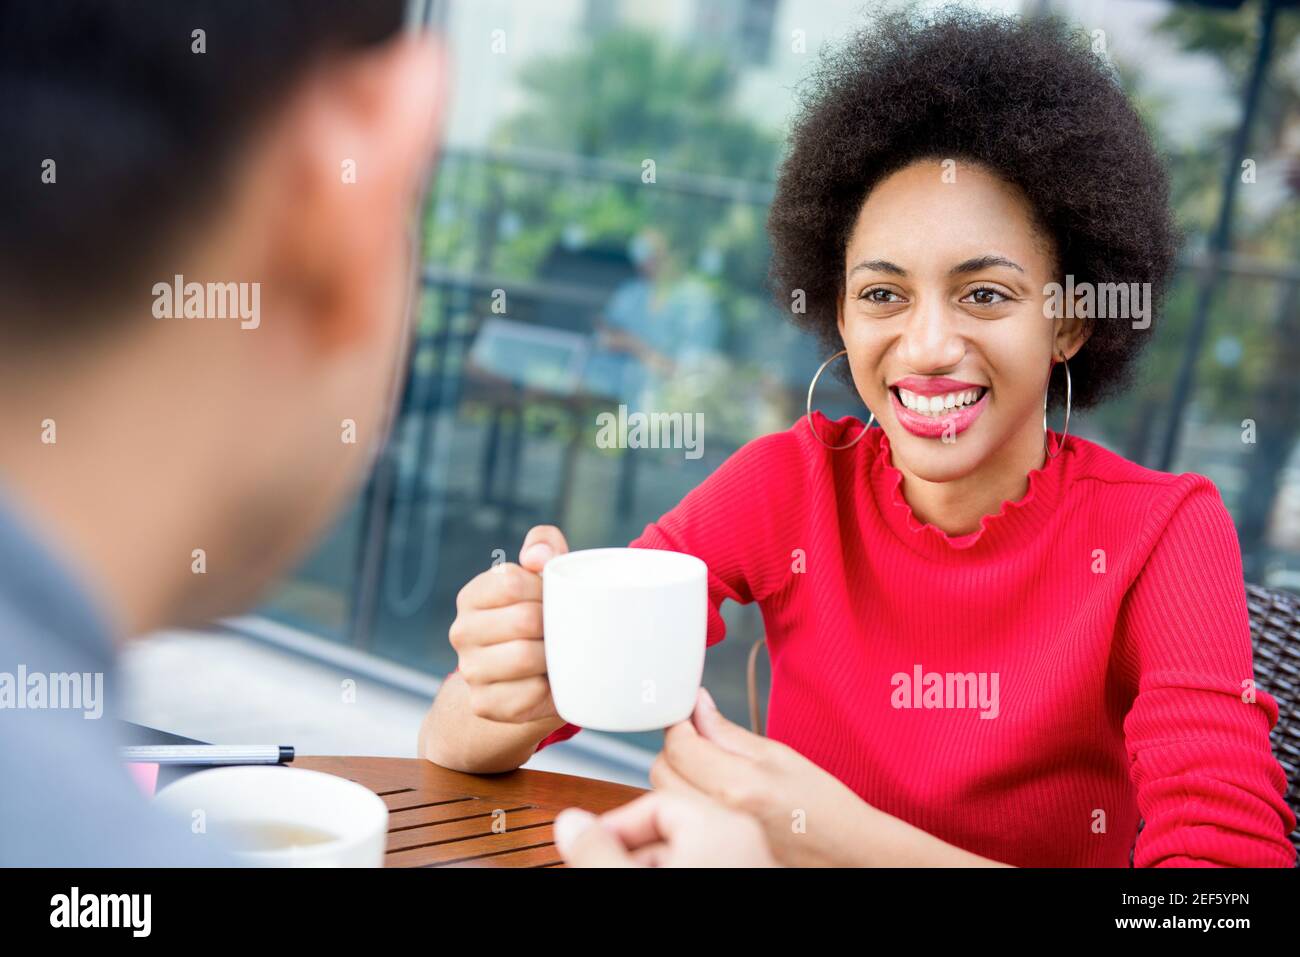 Smiling casual Afro-Caribbean woman drinking coffee with a friend in coffee shop Stock Photo